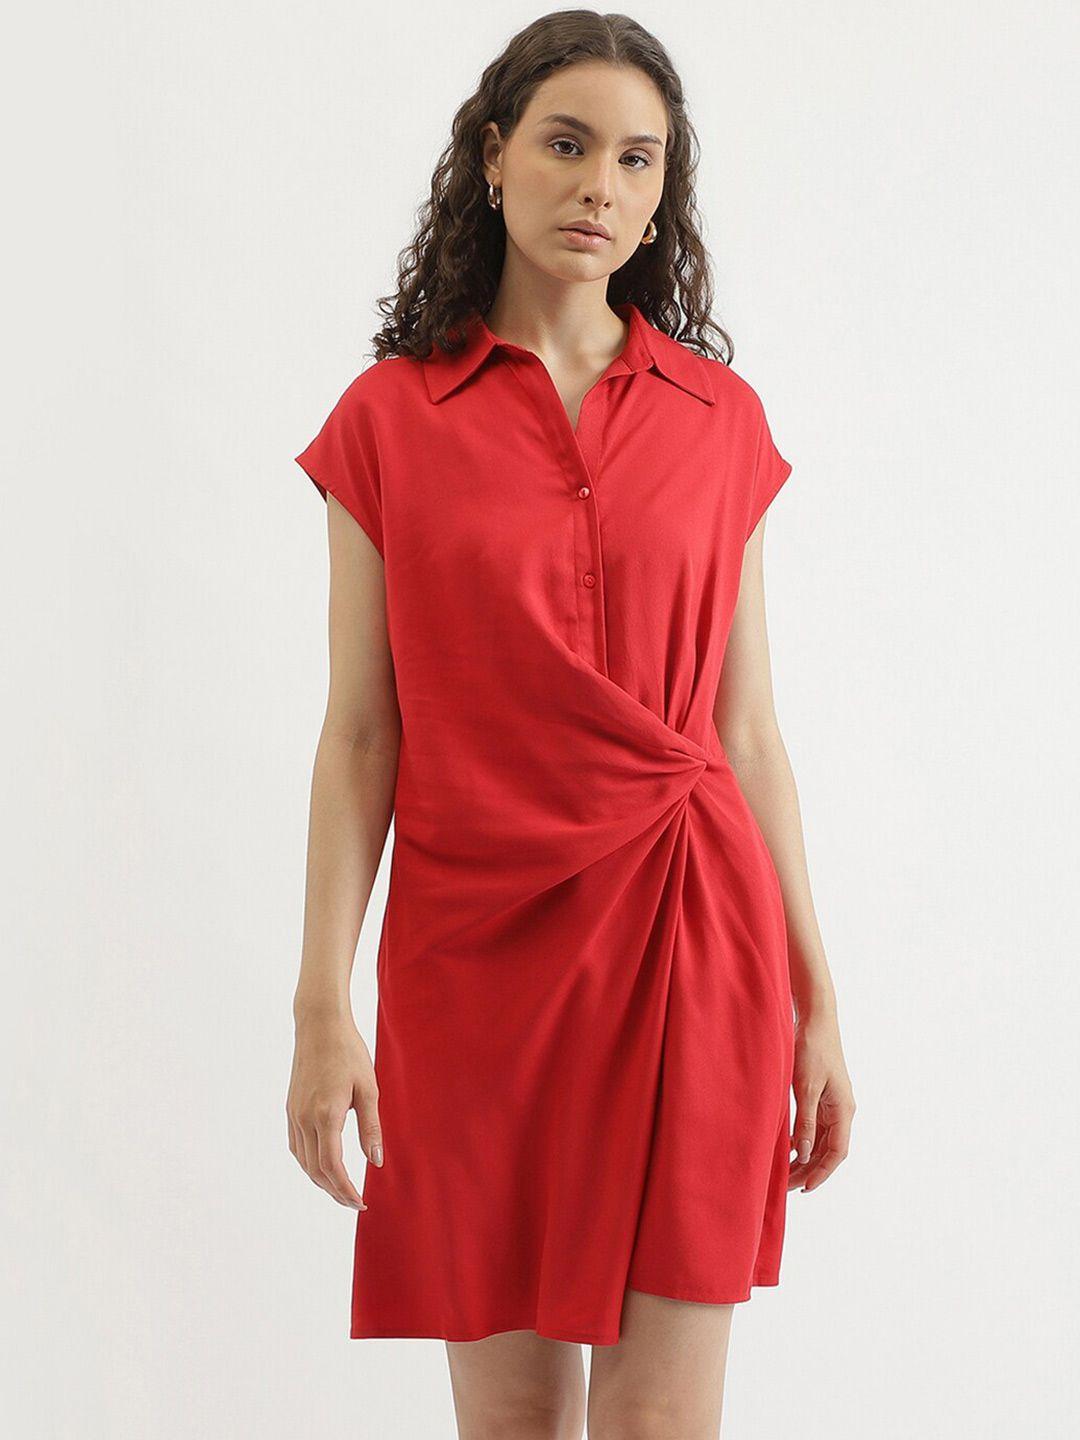 united colors of benetton red shirt dress